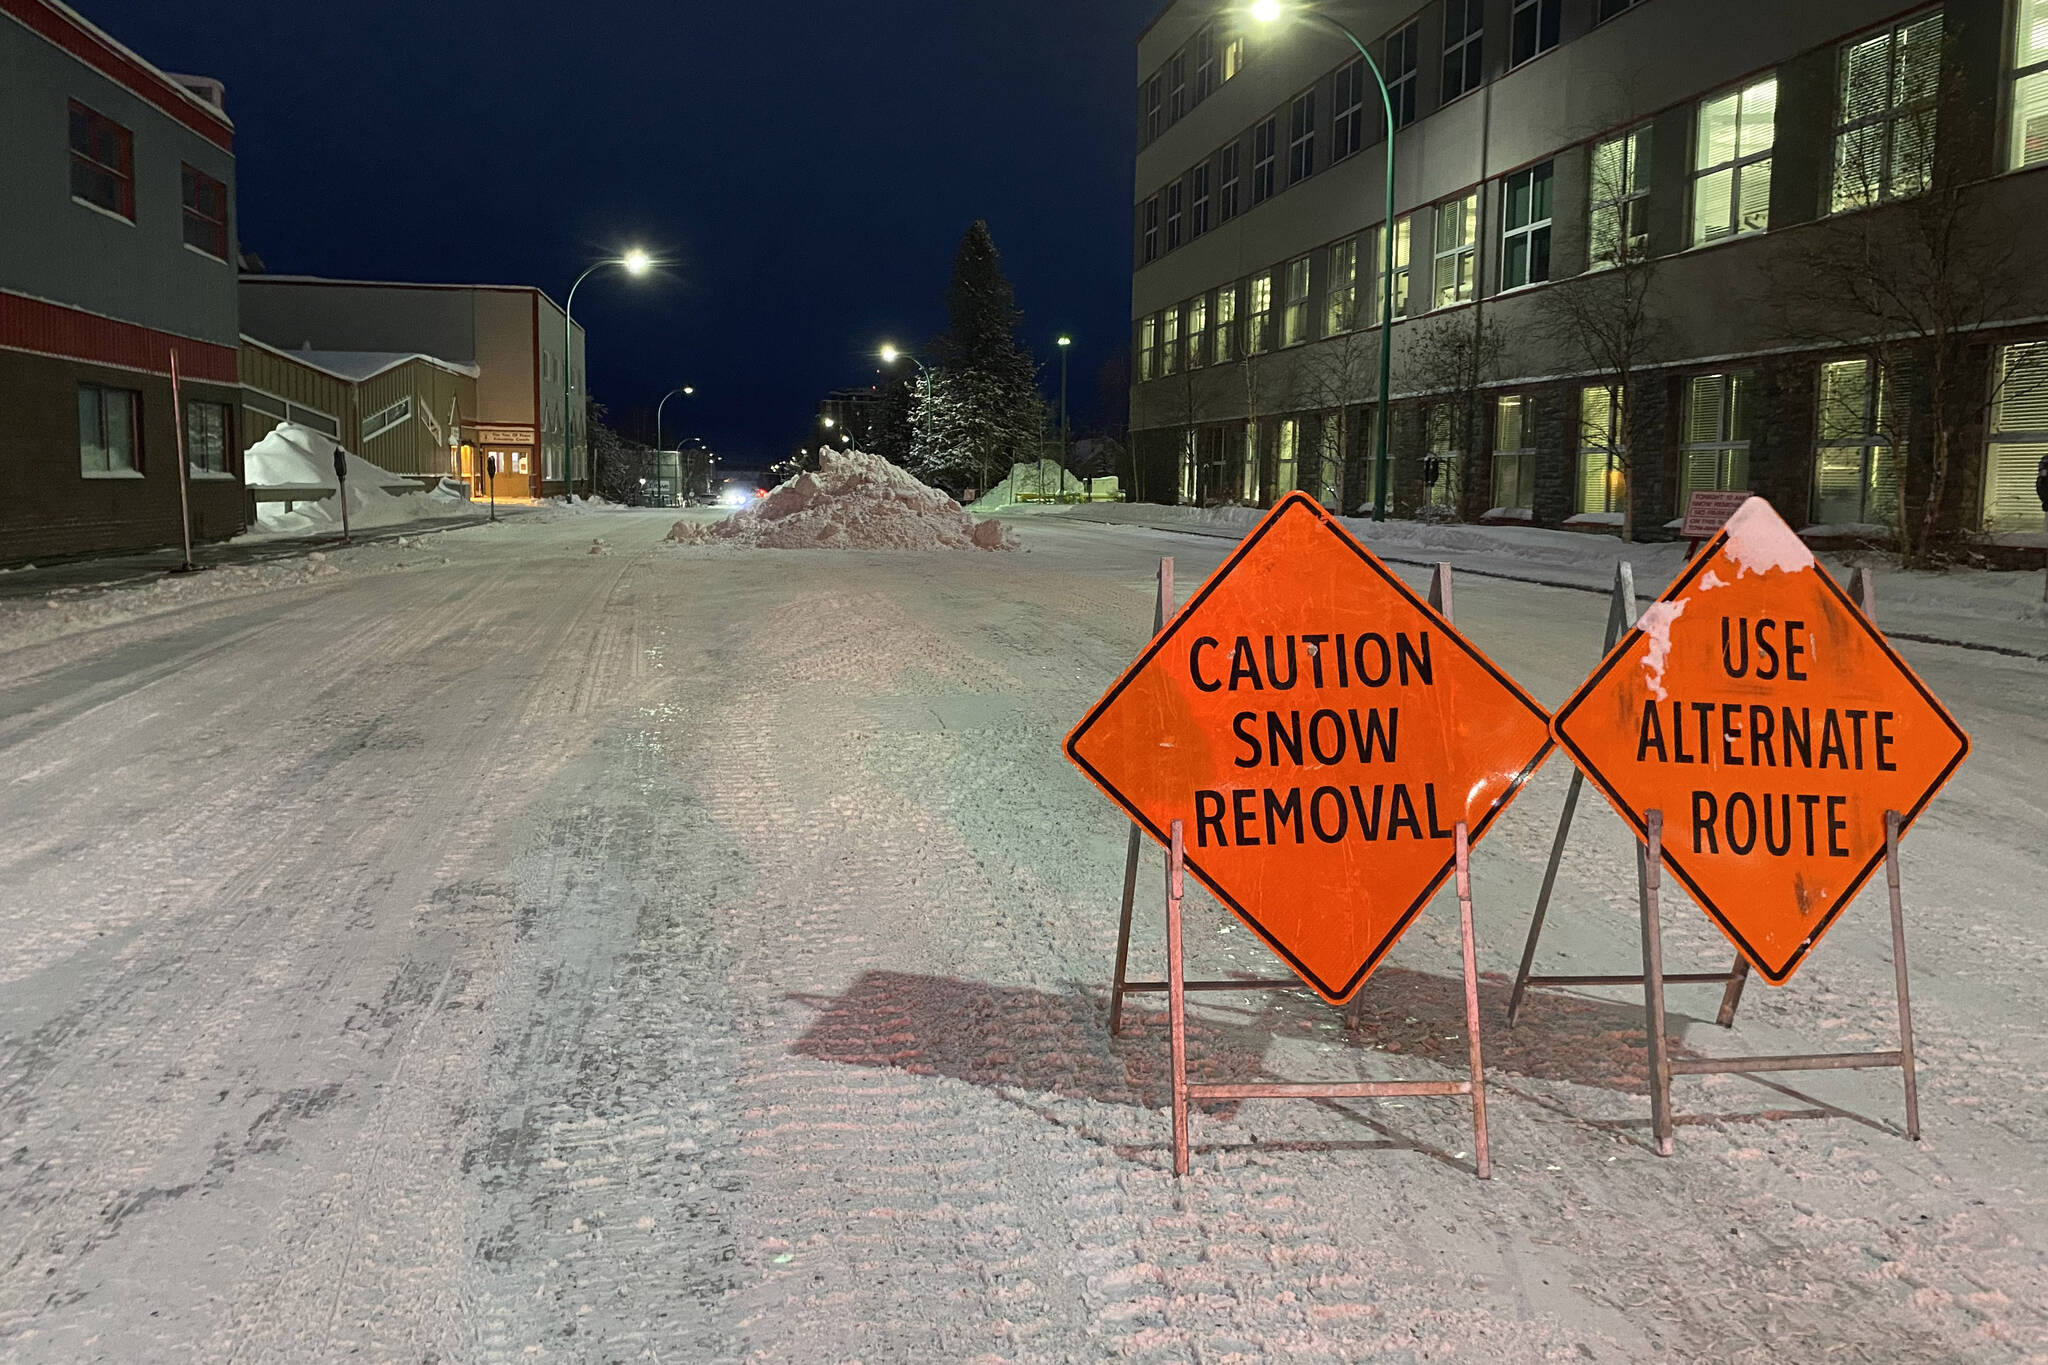 Snow removal signs and snow piled in the street are shown in Yellowknife, N.W.T., on Friday, Nov. 25, 2022. THE CANADIAN PRESS/Emily Blake